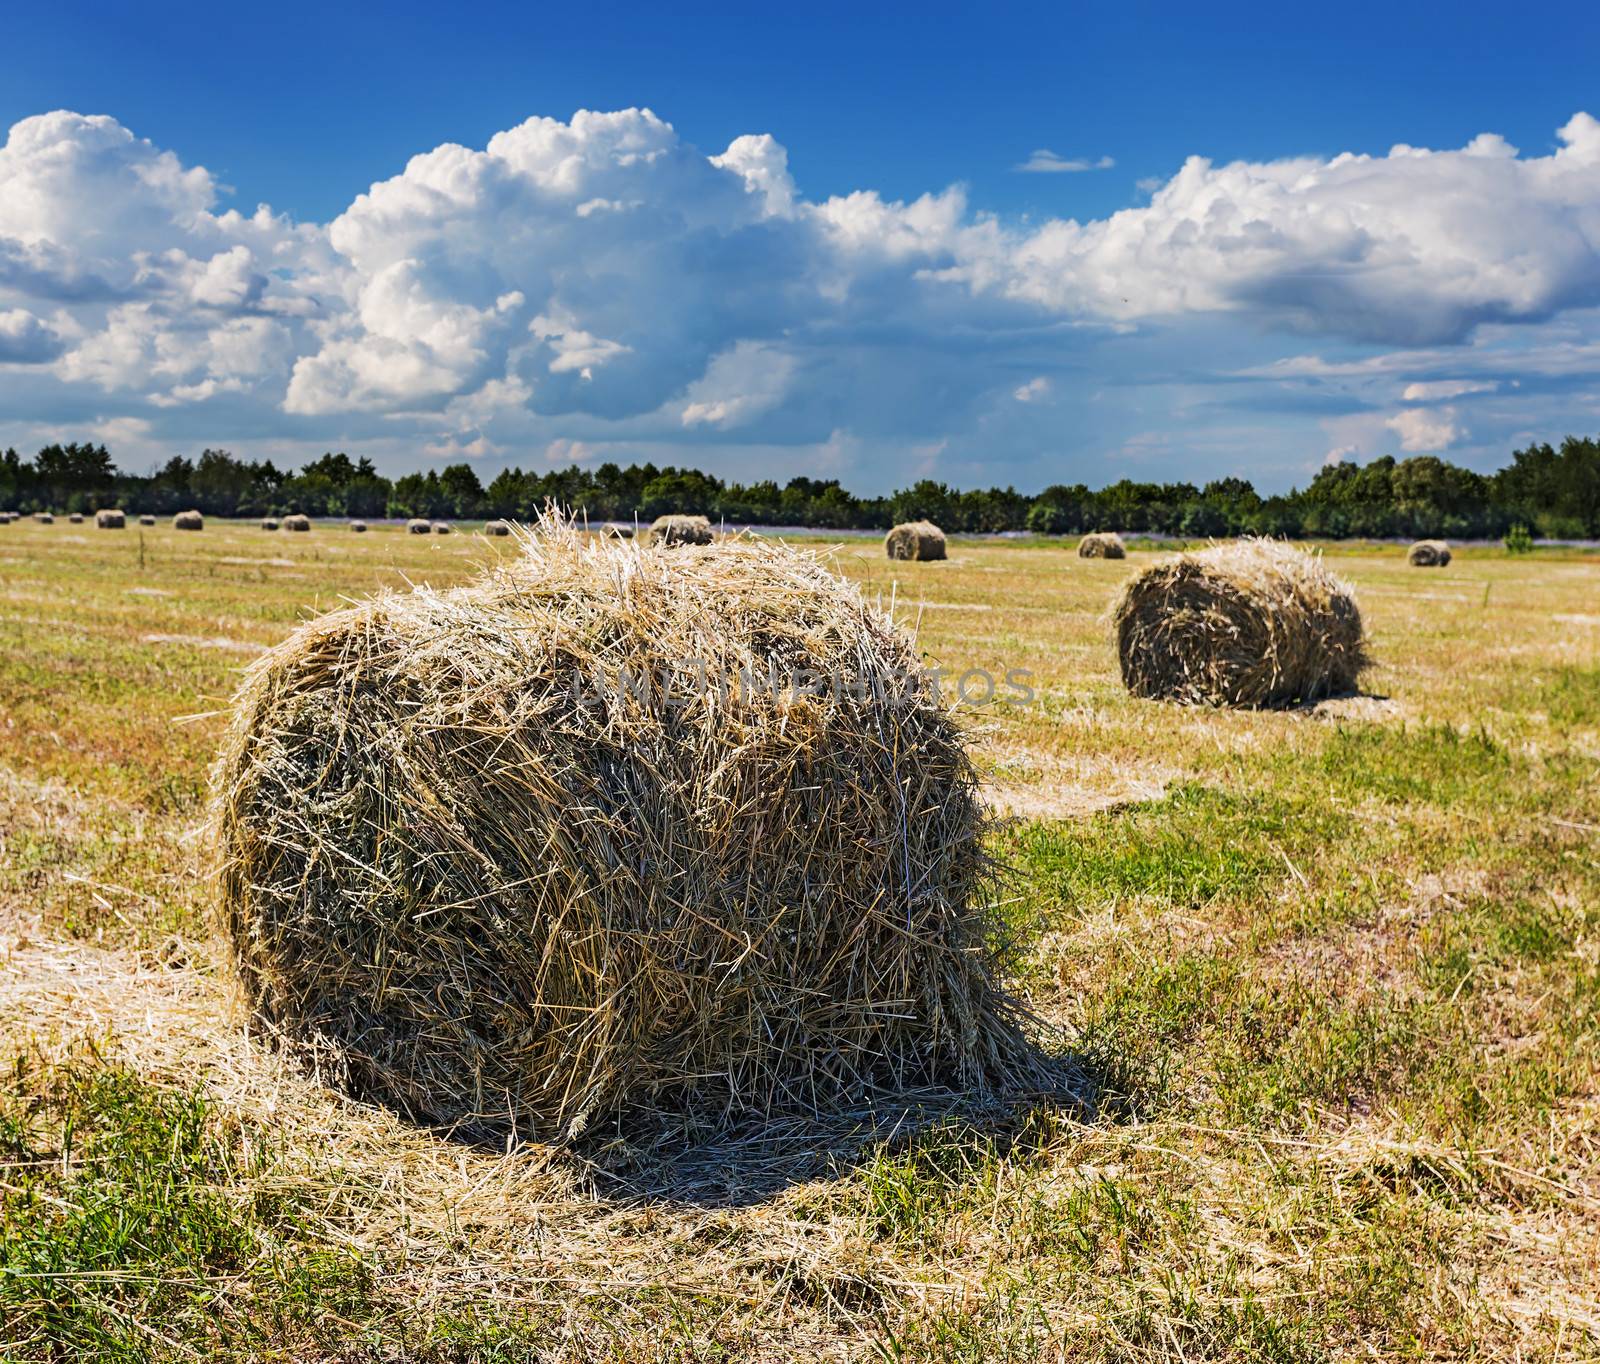 The harvested field with straw bales in summer